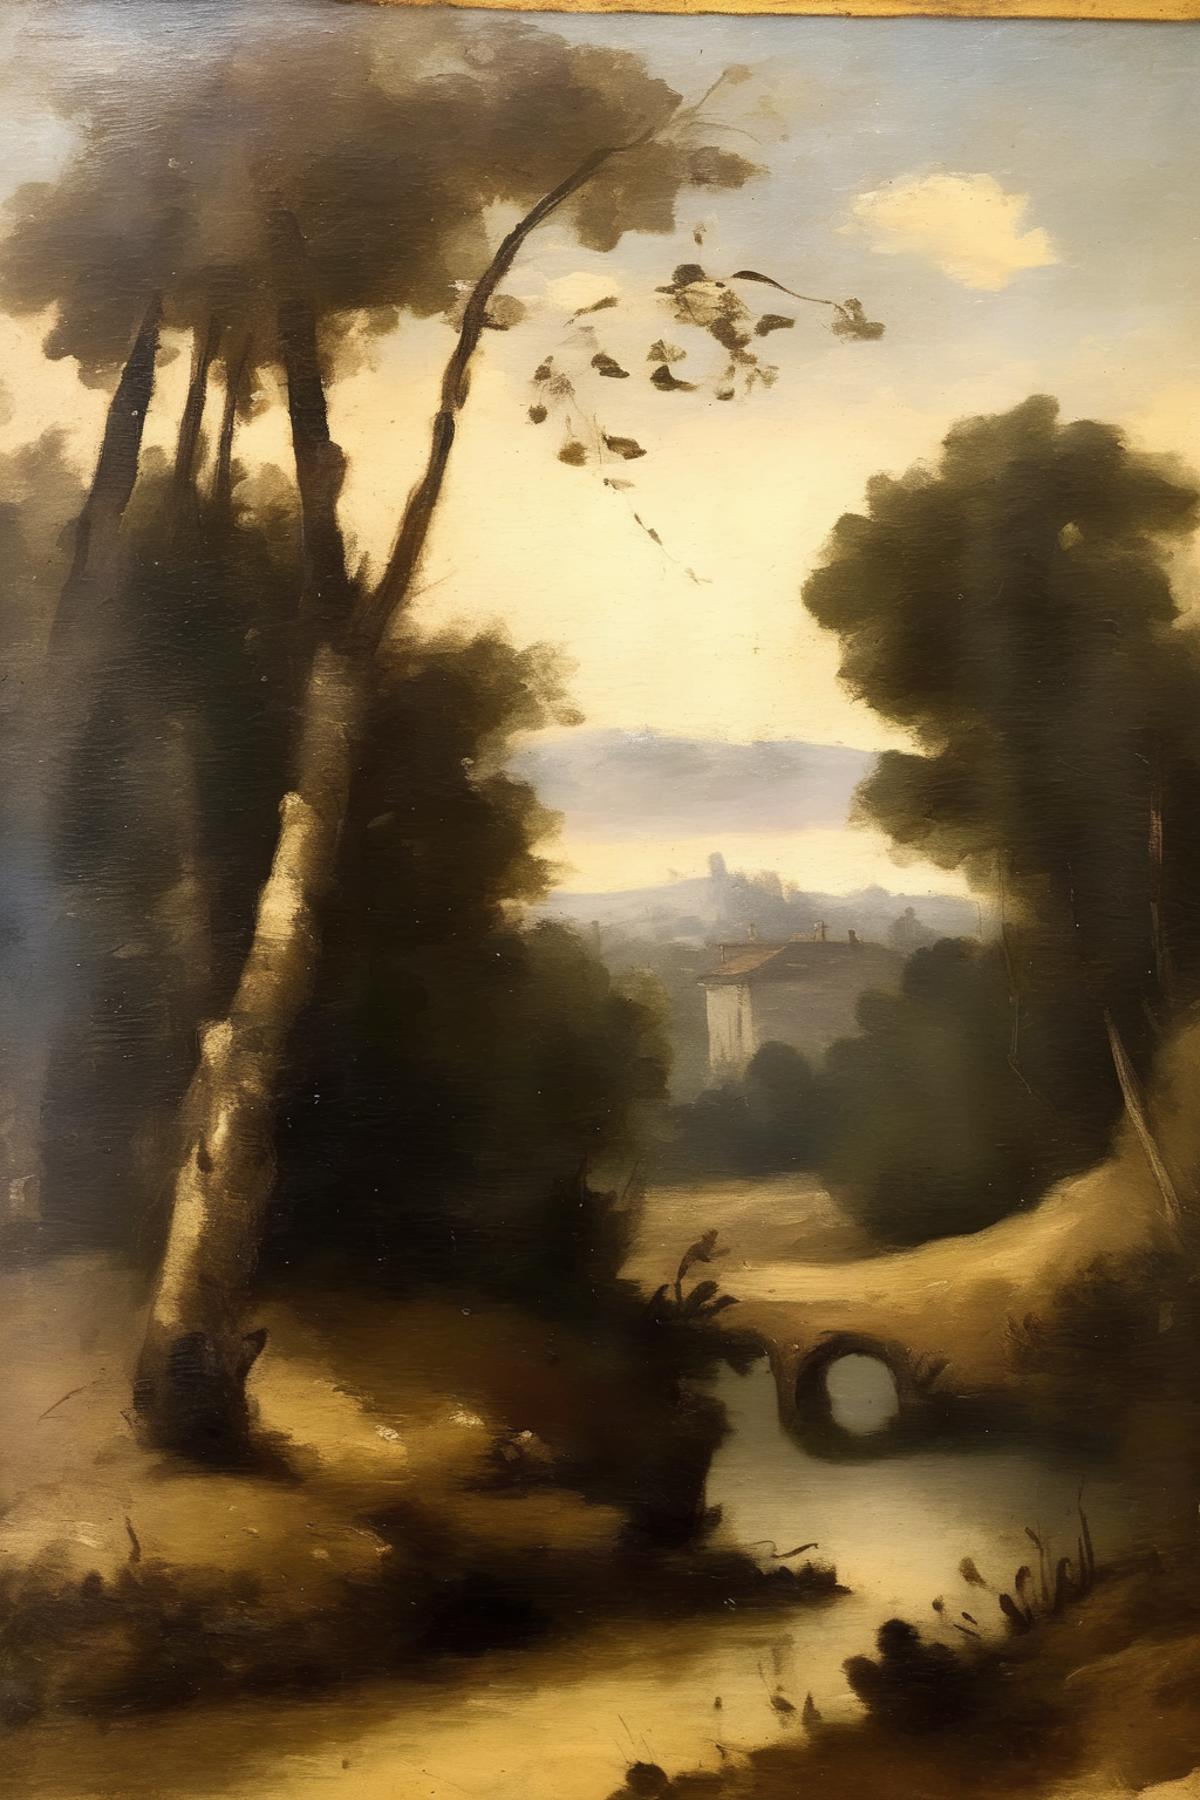 Jean-Baptiste-Camille Corot Style image by Kappa_Neuro